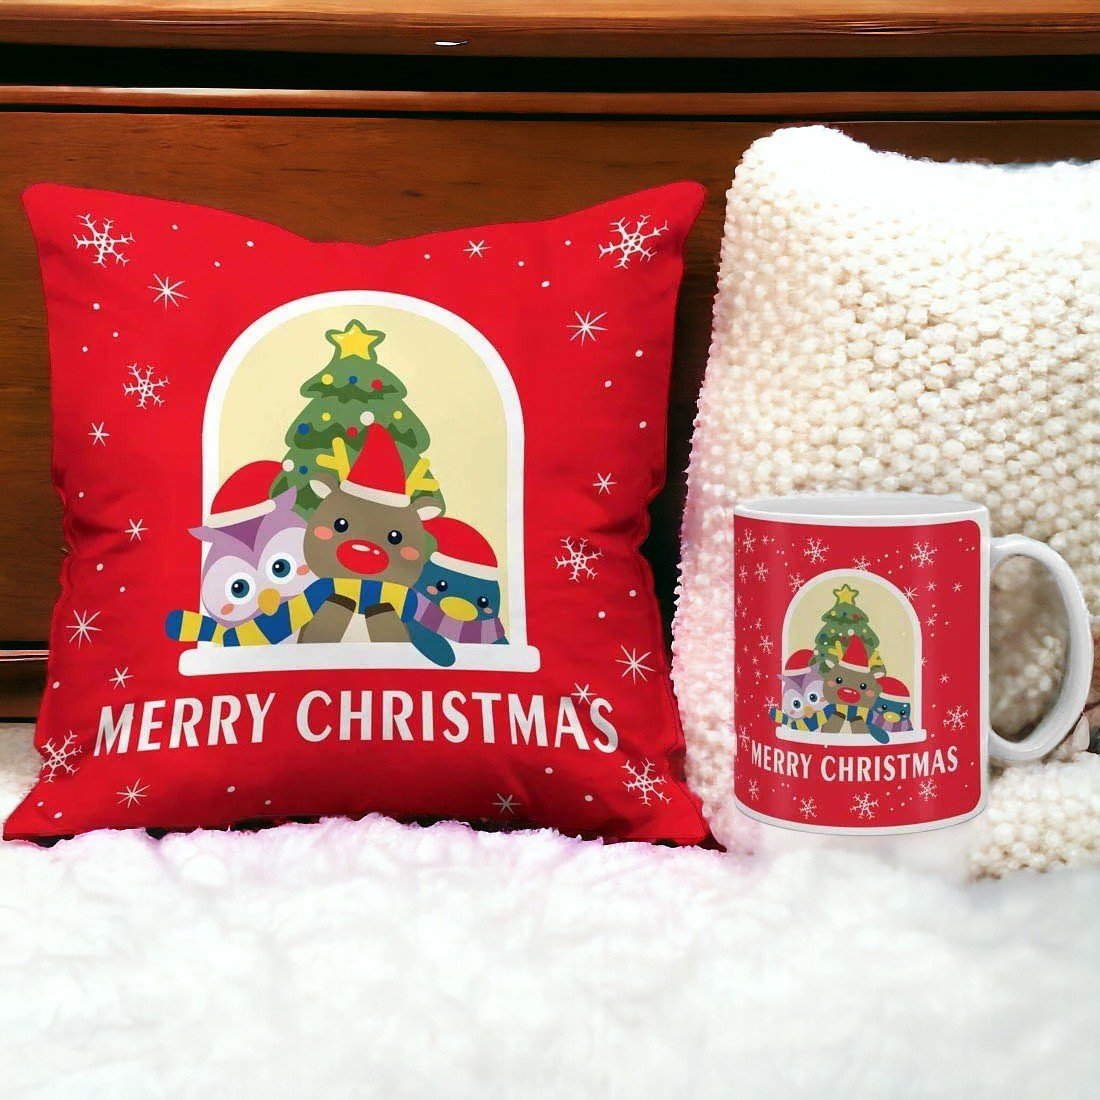 Merry Christmas Printed Red Cushion